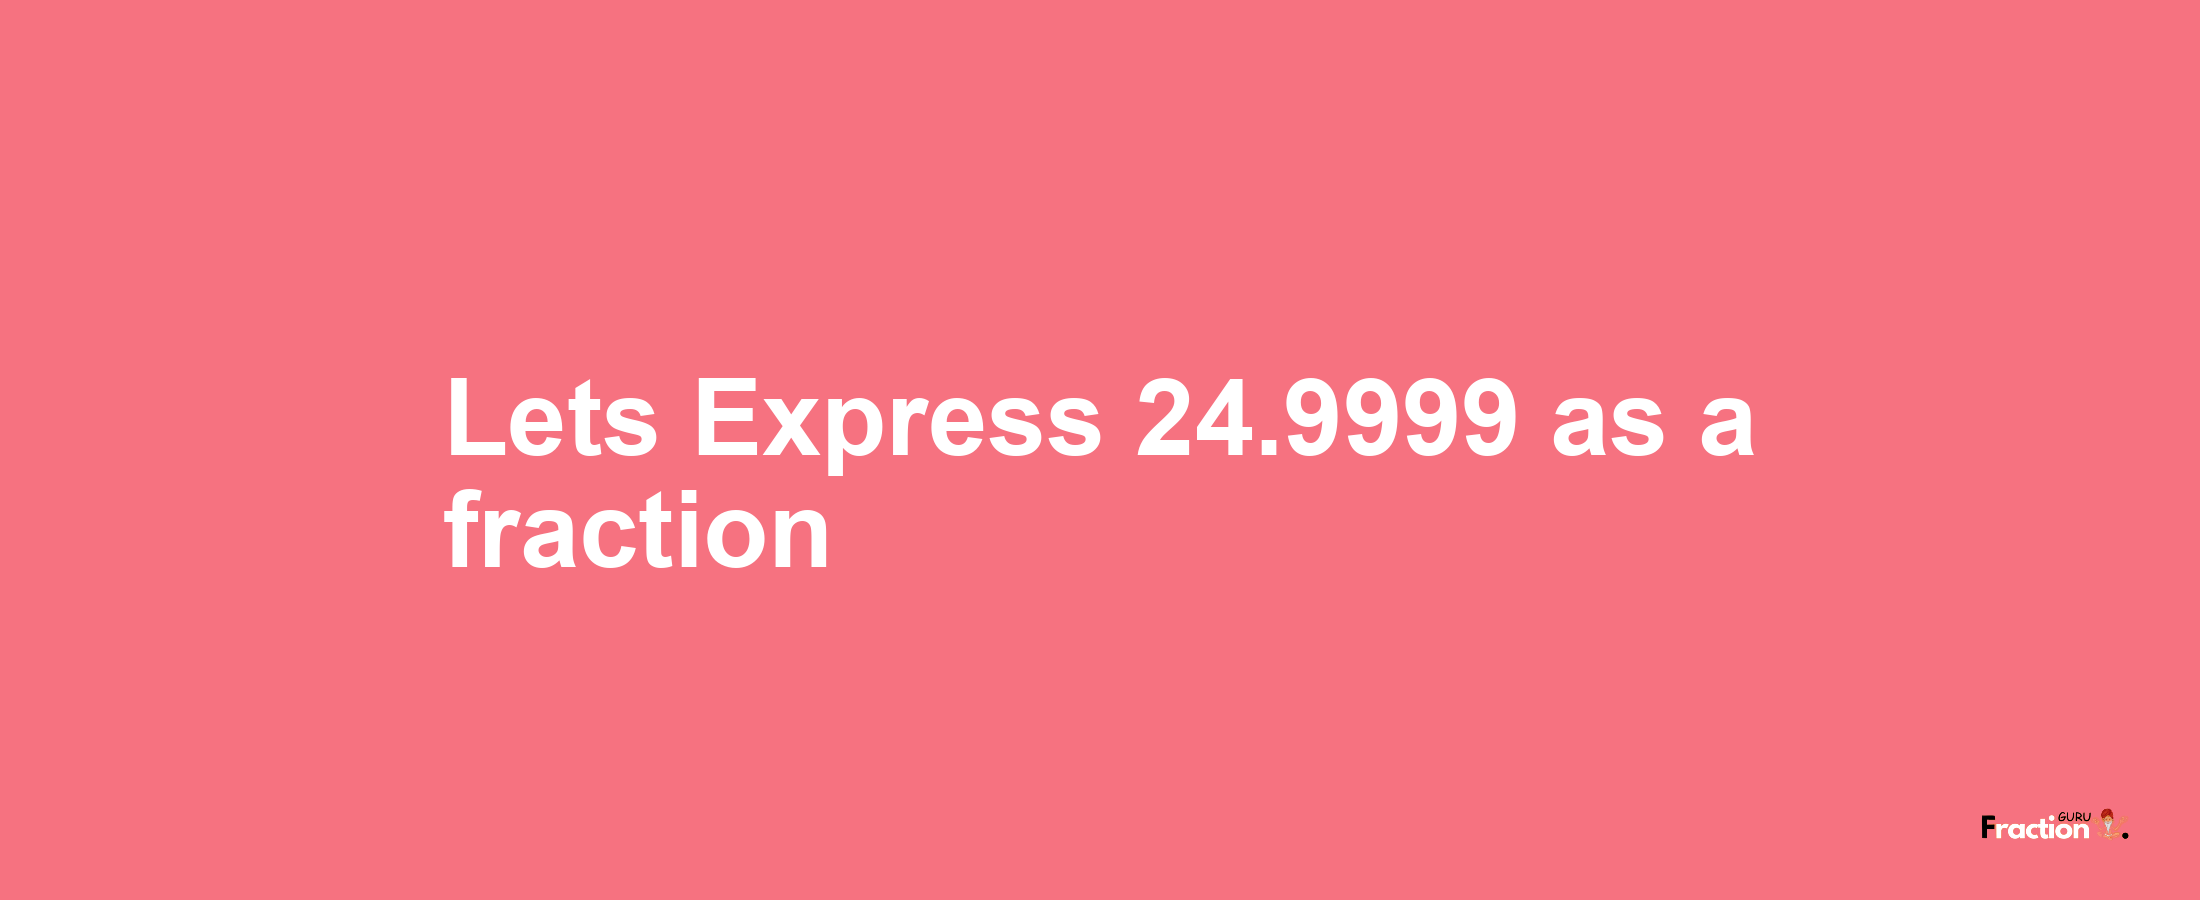 Lets Express 24.9999 as afraction